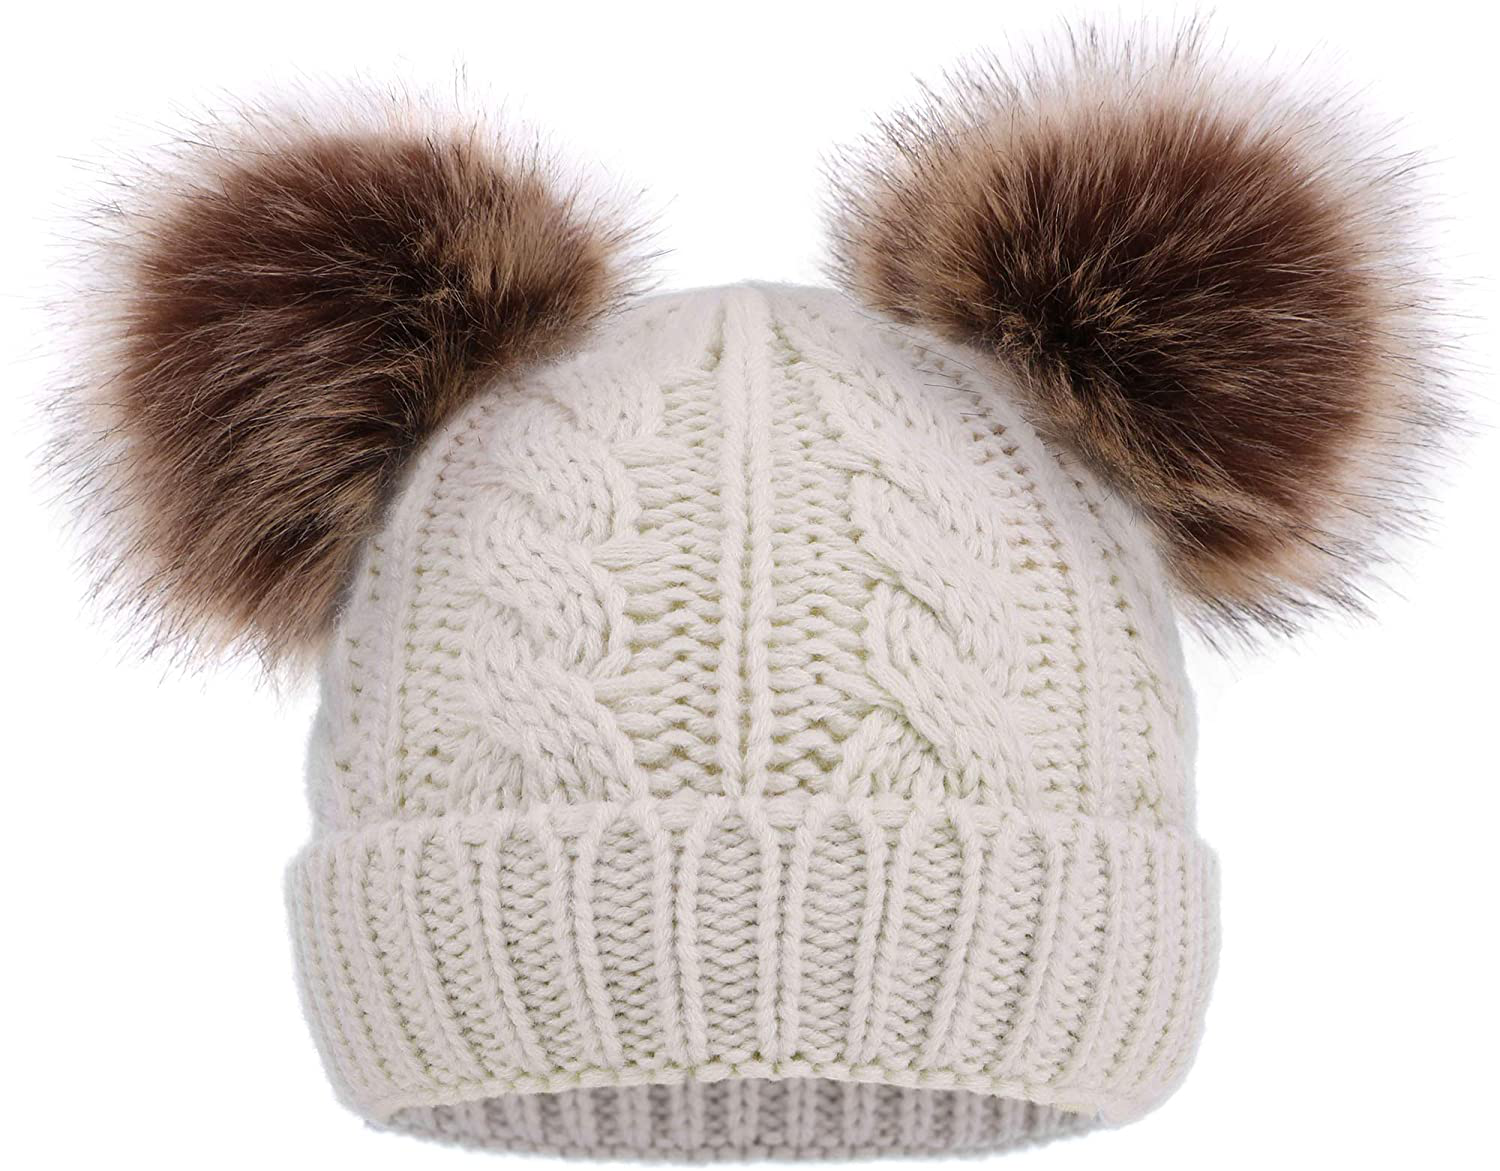 Simplicity Warm Kids Boys Girls Winter Hat with Pompom Ears Elastic Knitted Toddler Beanie Hats for Girls Boys